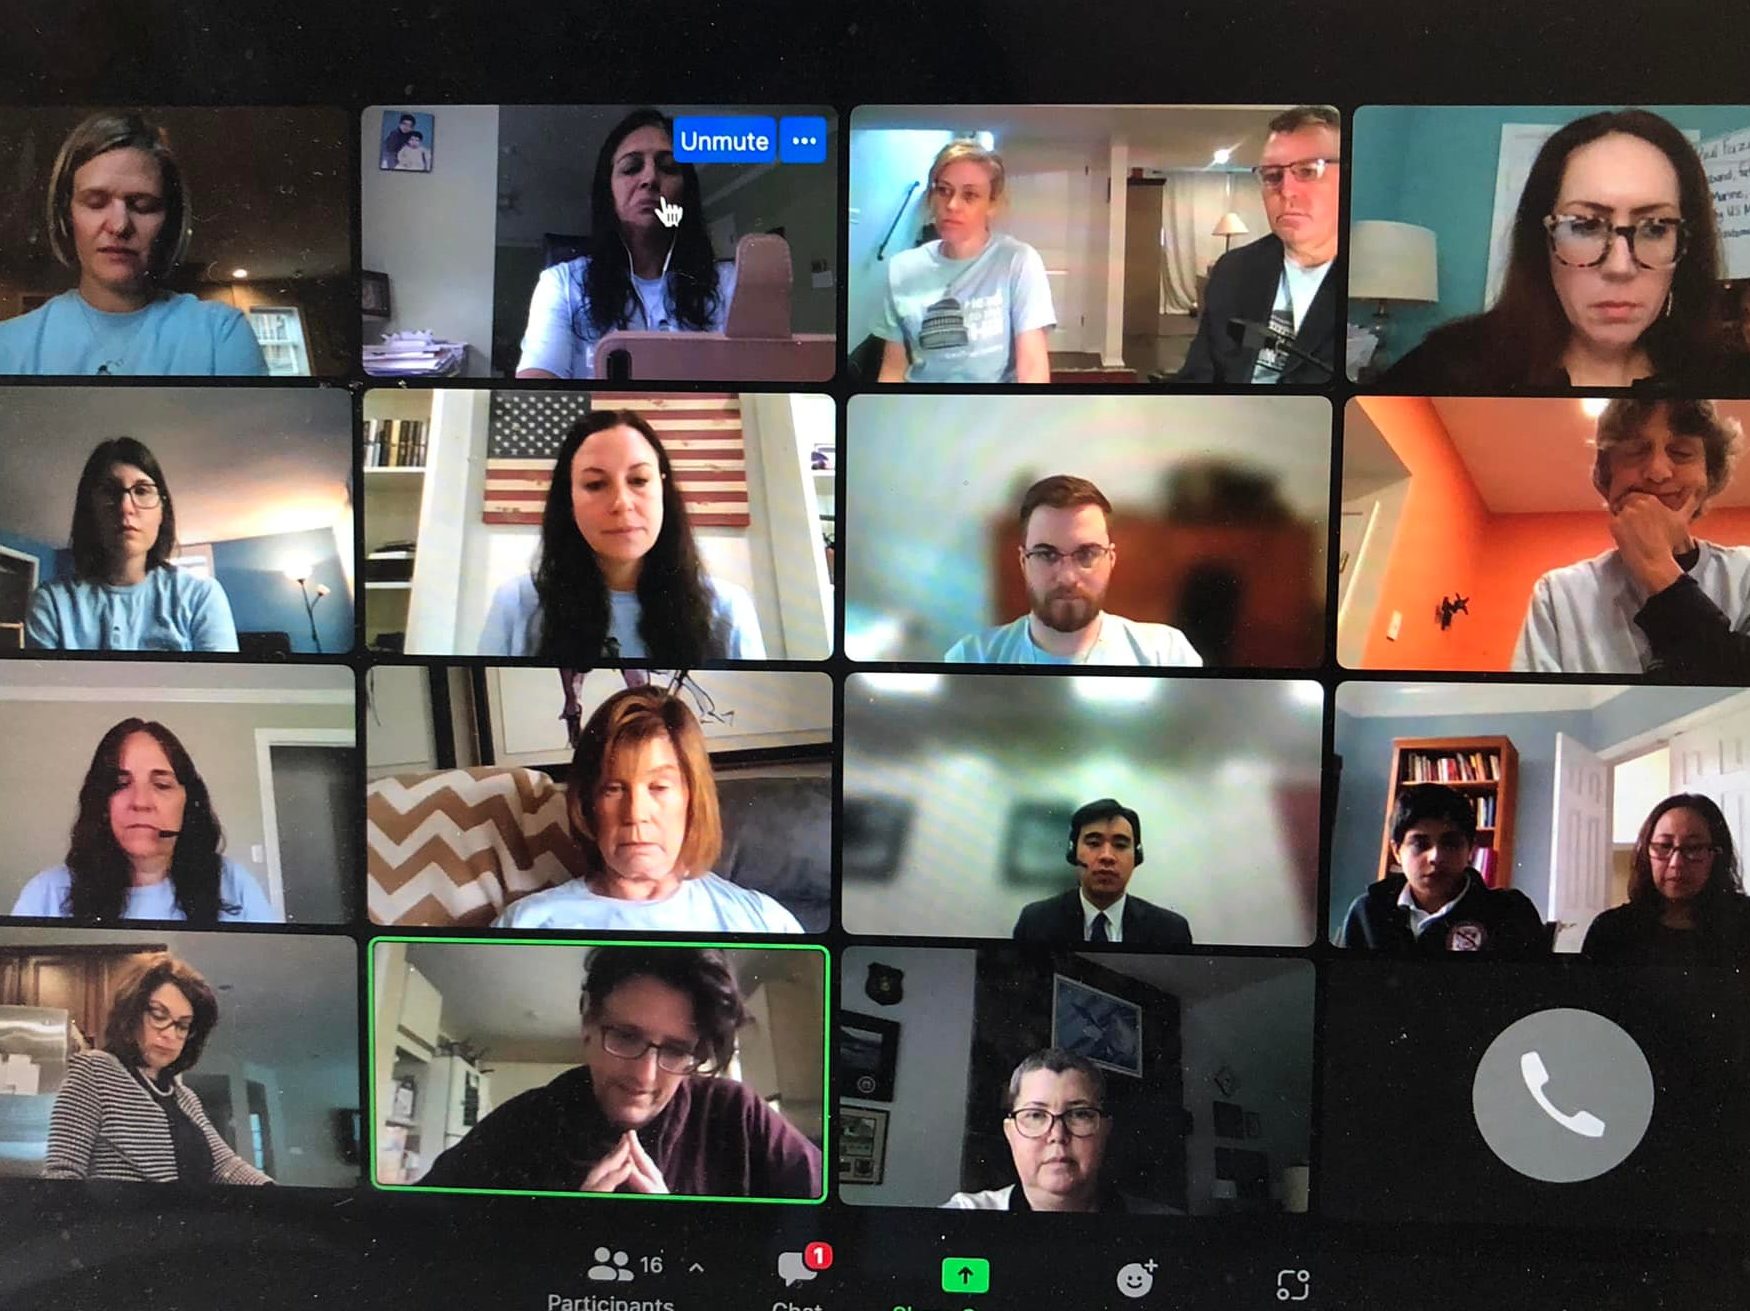 A collection of people join a Zoom call with a representative's staff member to discuss important issues impacting the brain tumor community.